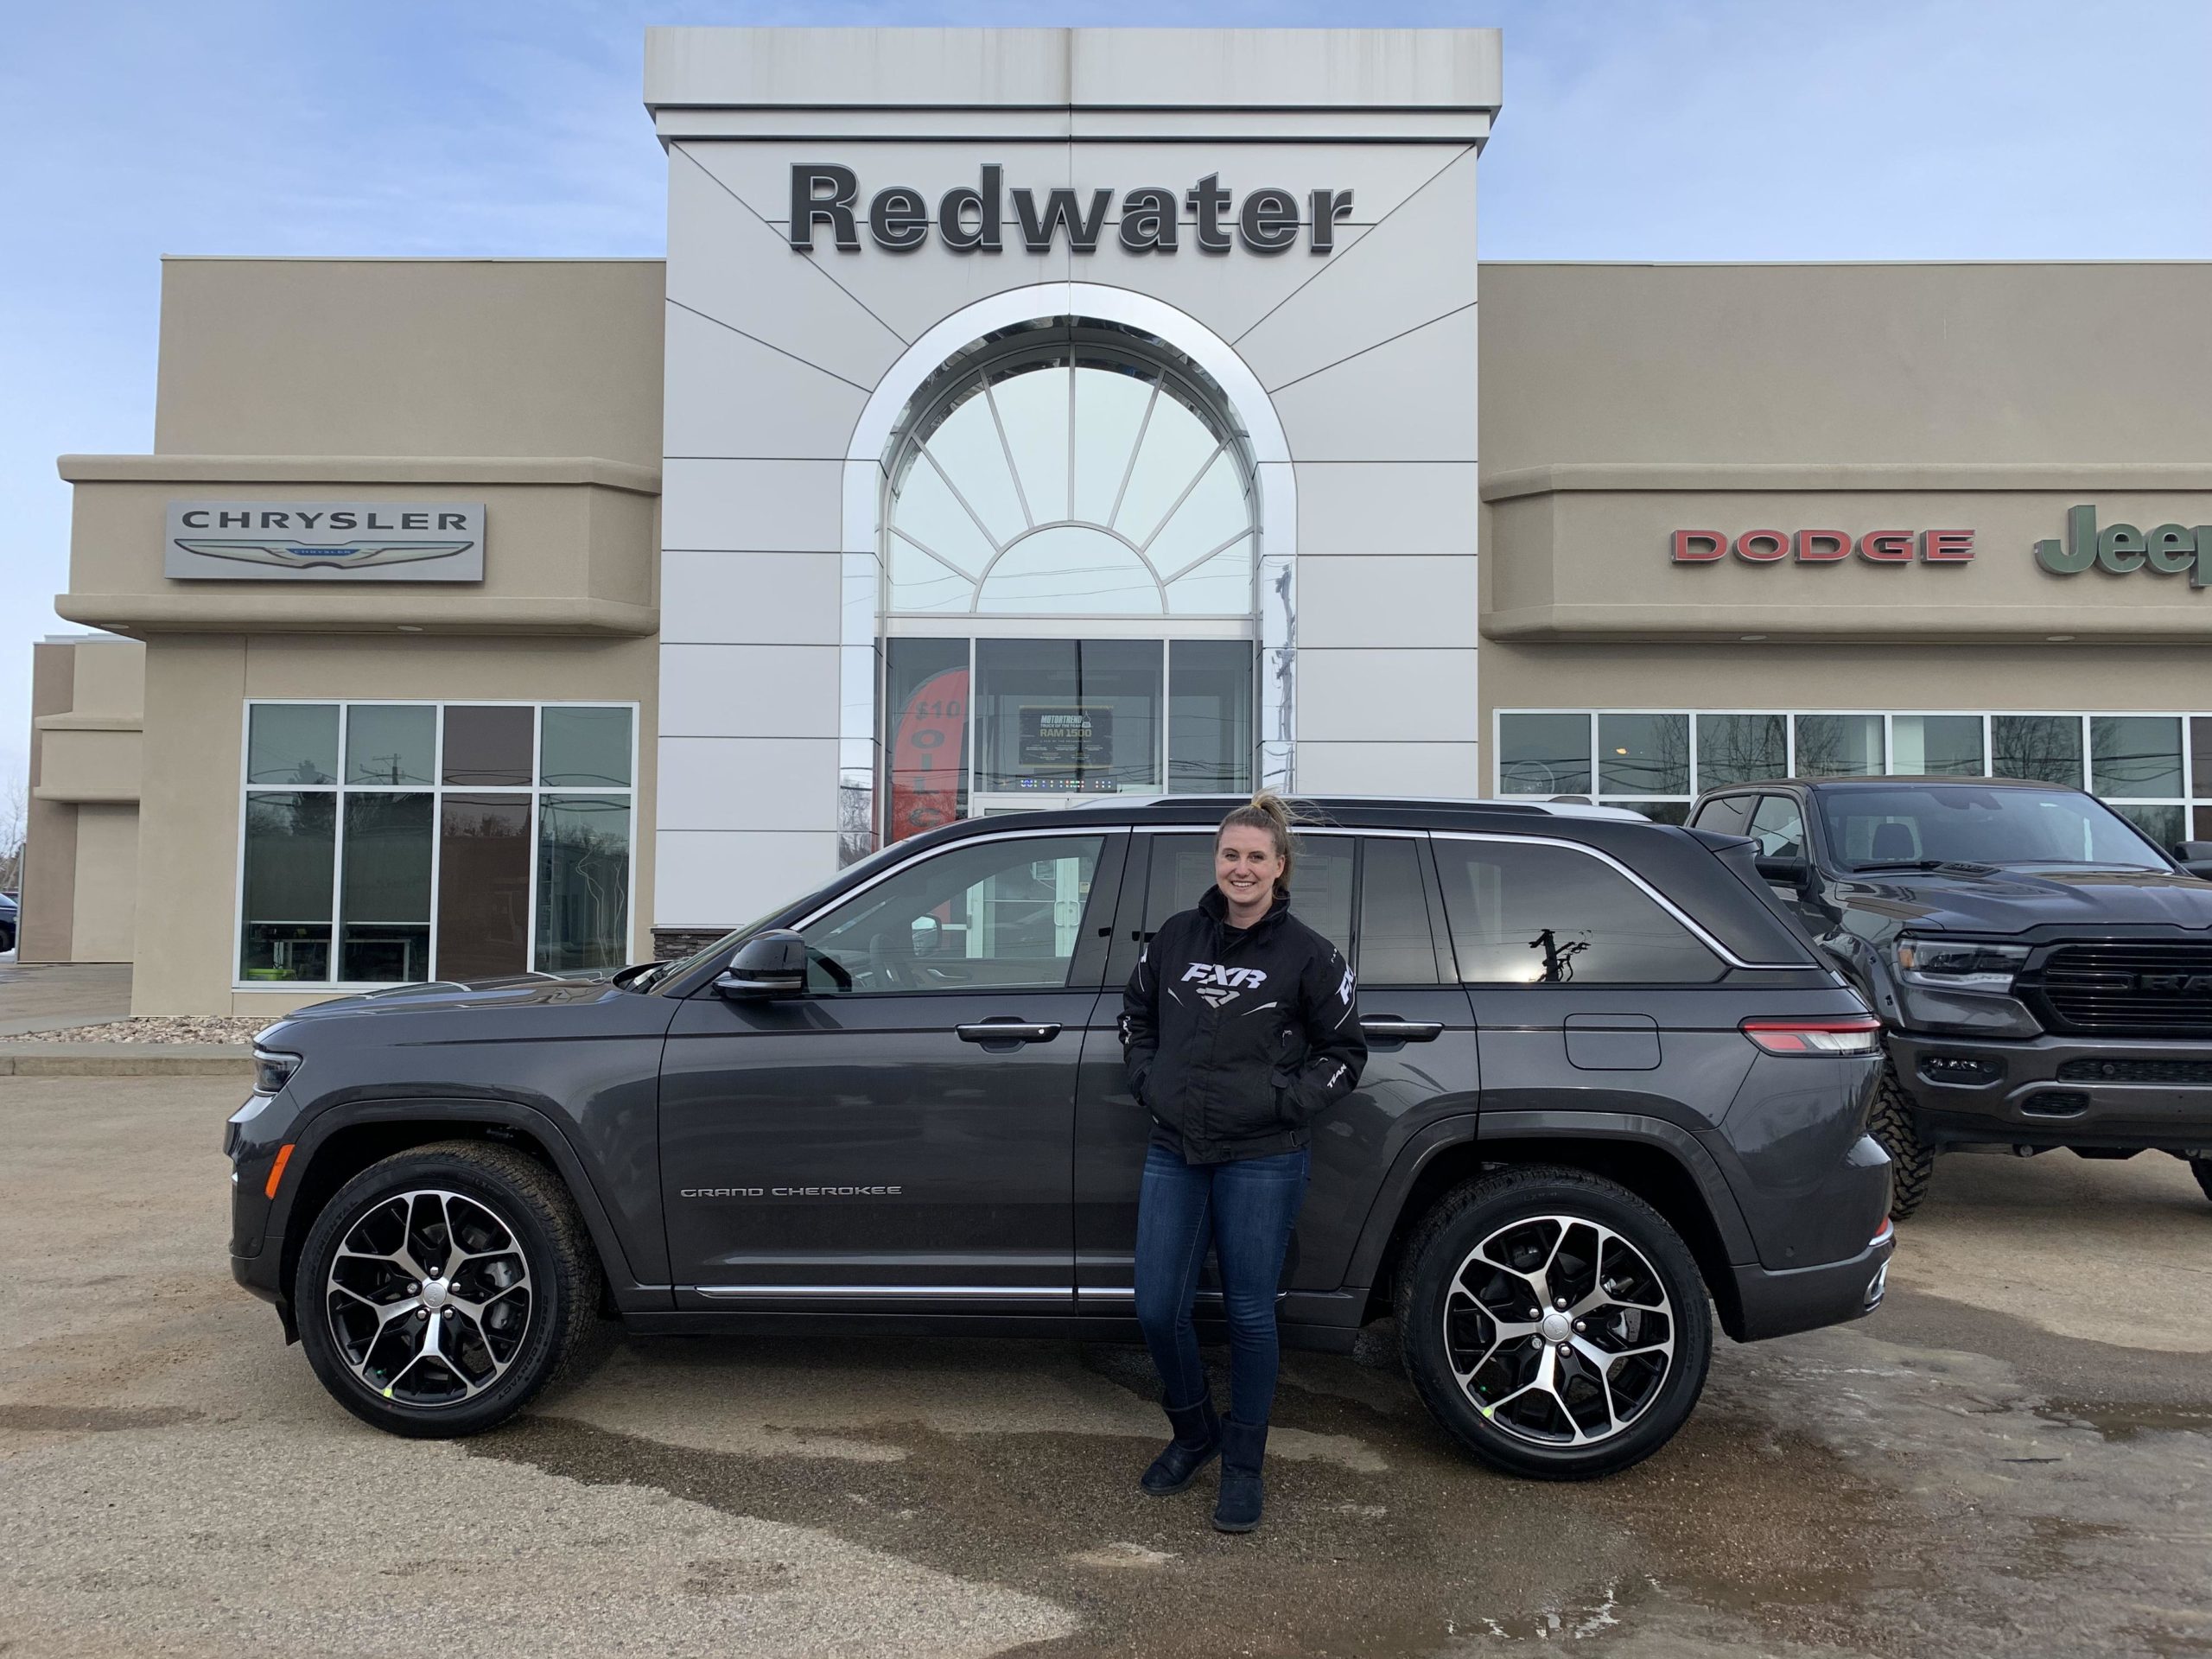 NGH0032 New 2022 Jeep Grand Cherokee Summit Reserve 4x4 Redwater Dodge